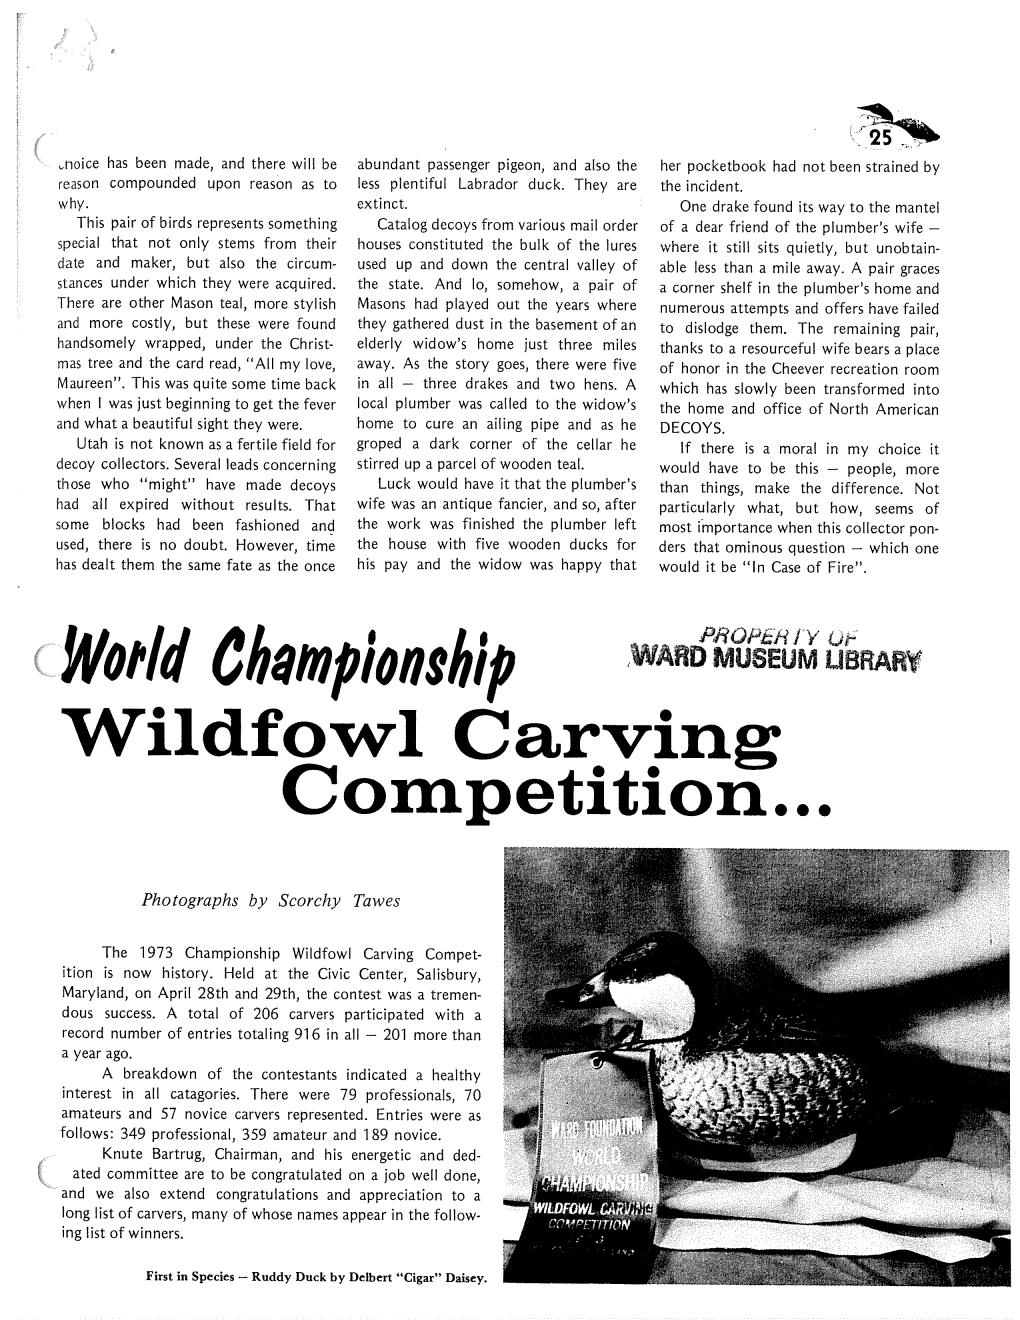 Wotlil Championship WARD MUSEUM UBRARY Wildfowl Carving Competition